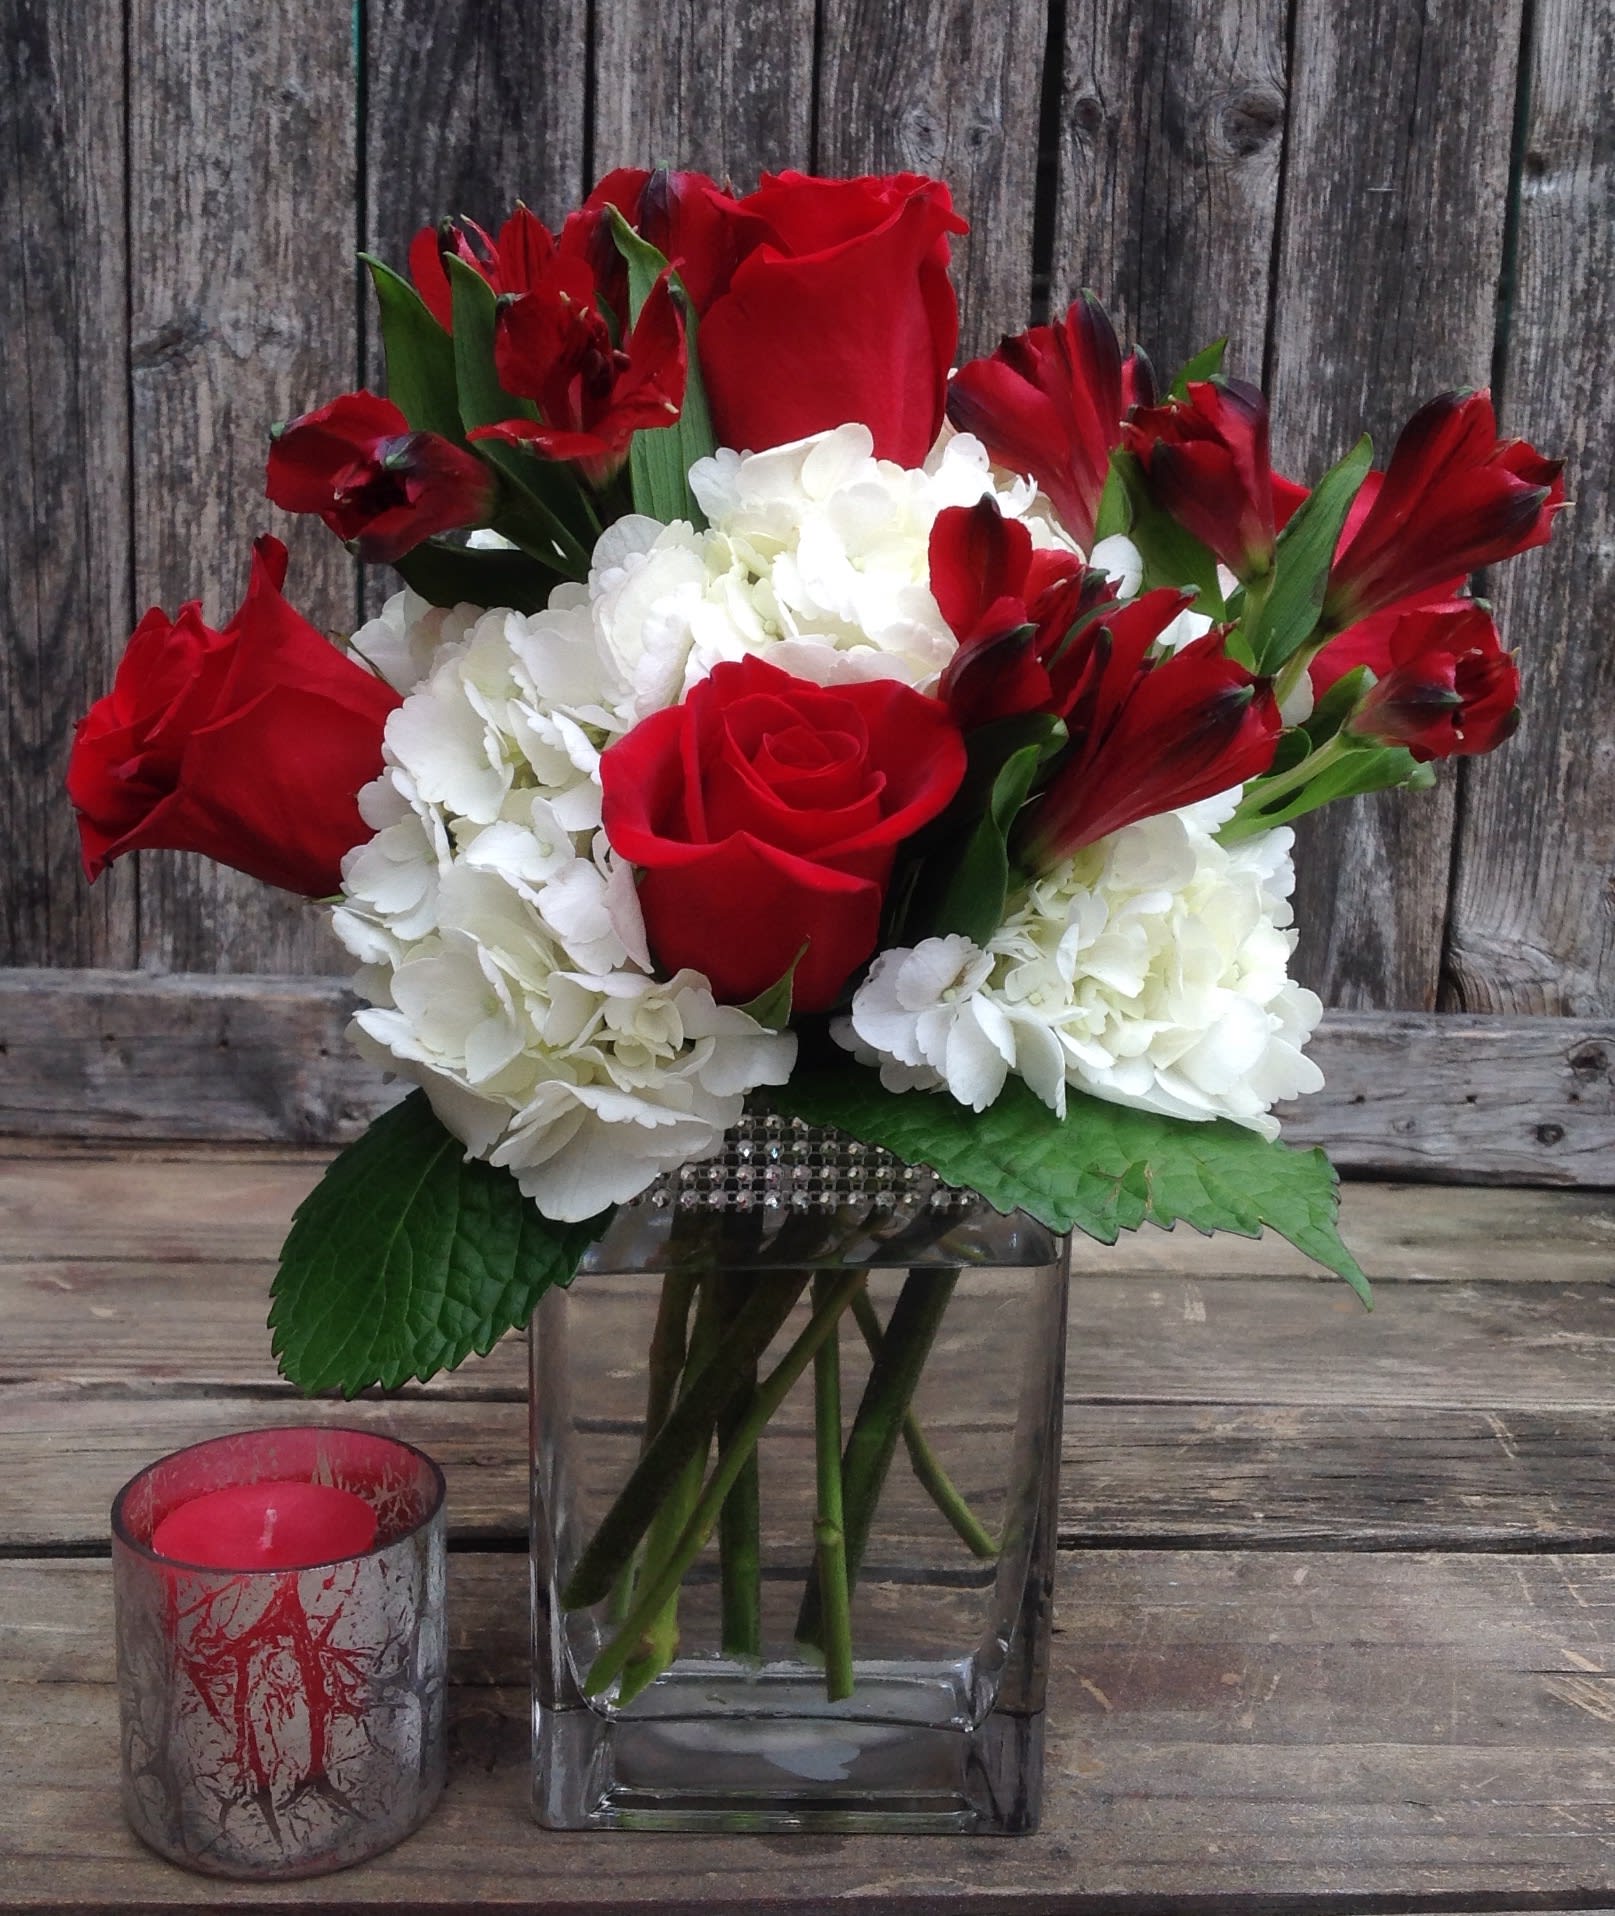 Love and Romance - Sing her a love song - with flowers. This lush, loving rose arrangement tells her just how much you care.  Contemporary vase with hydrangeas, roses &amp; red alstromerias will make her day. 